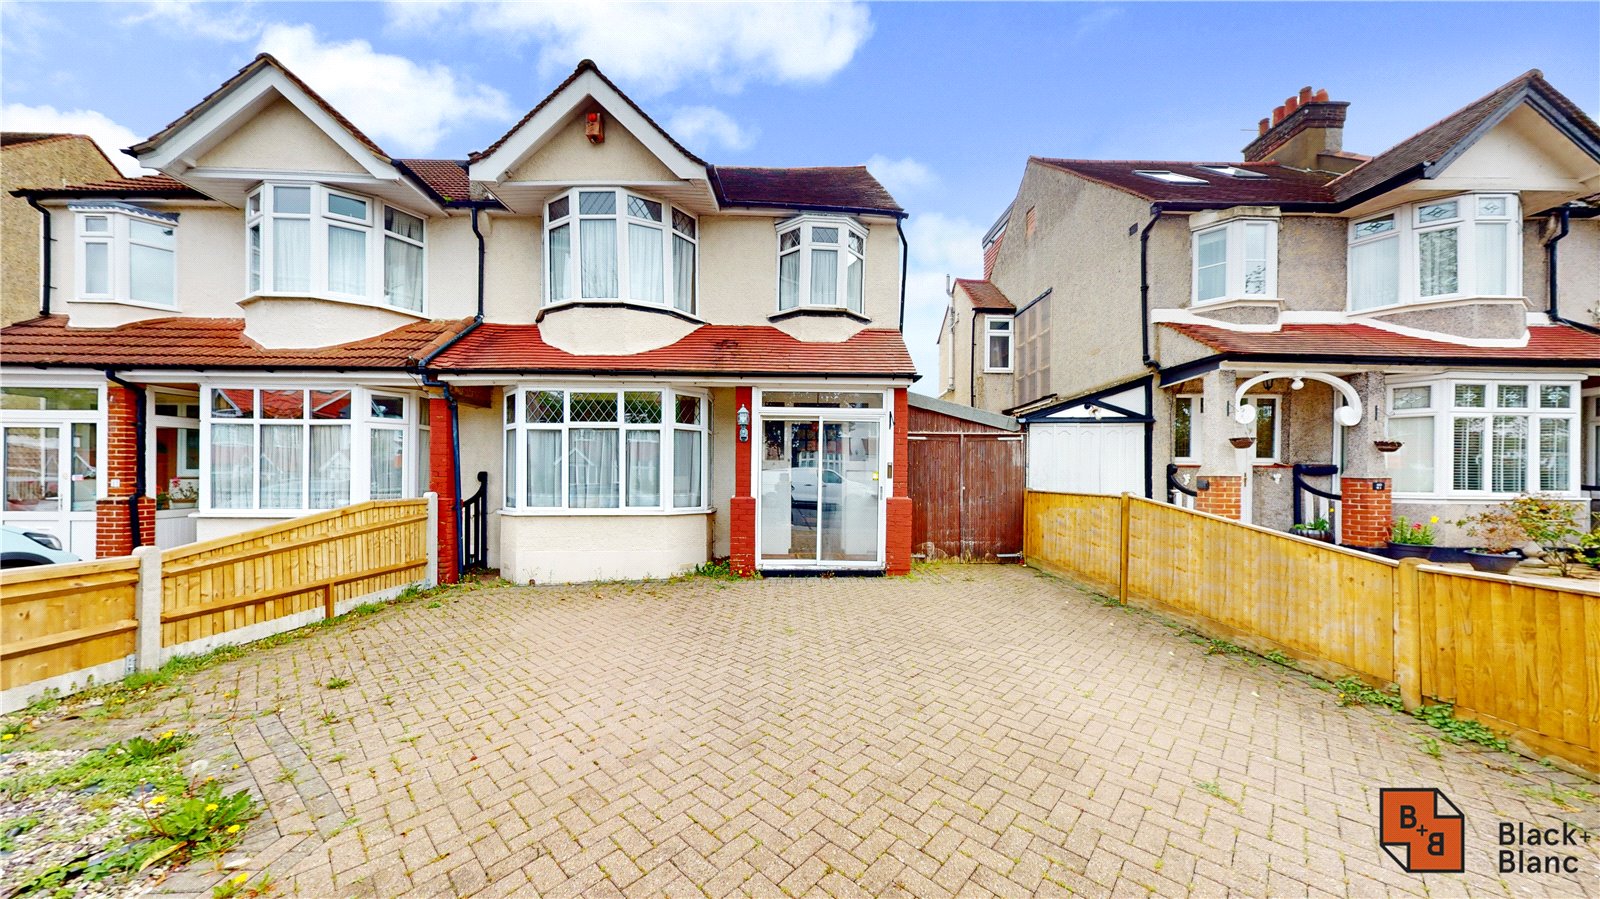 4 bed house for sale in Sefton Road, Croydon - Property Image 1